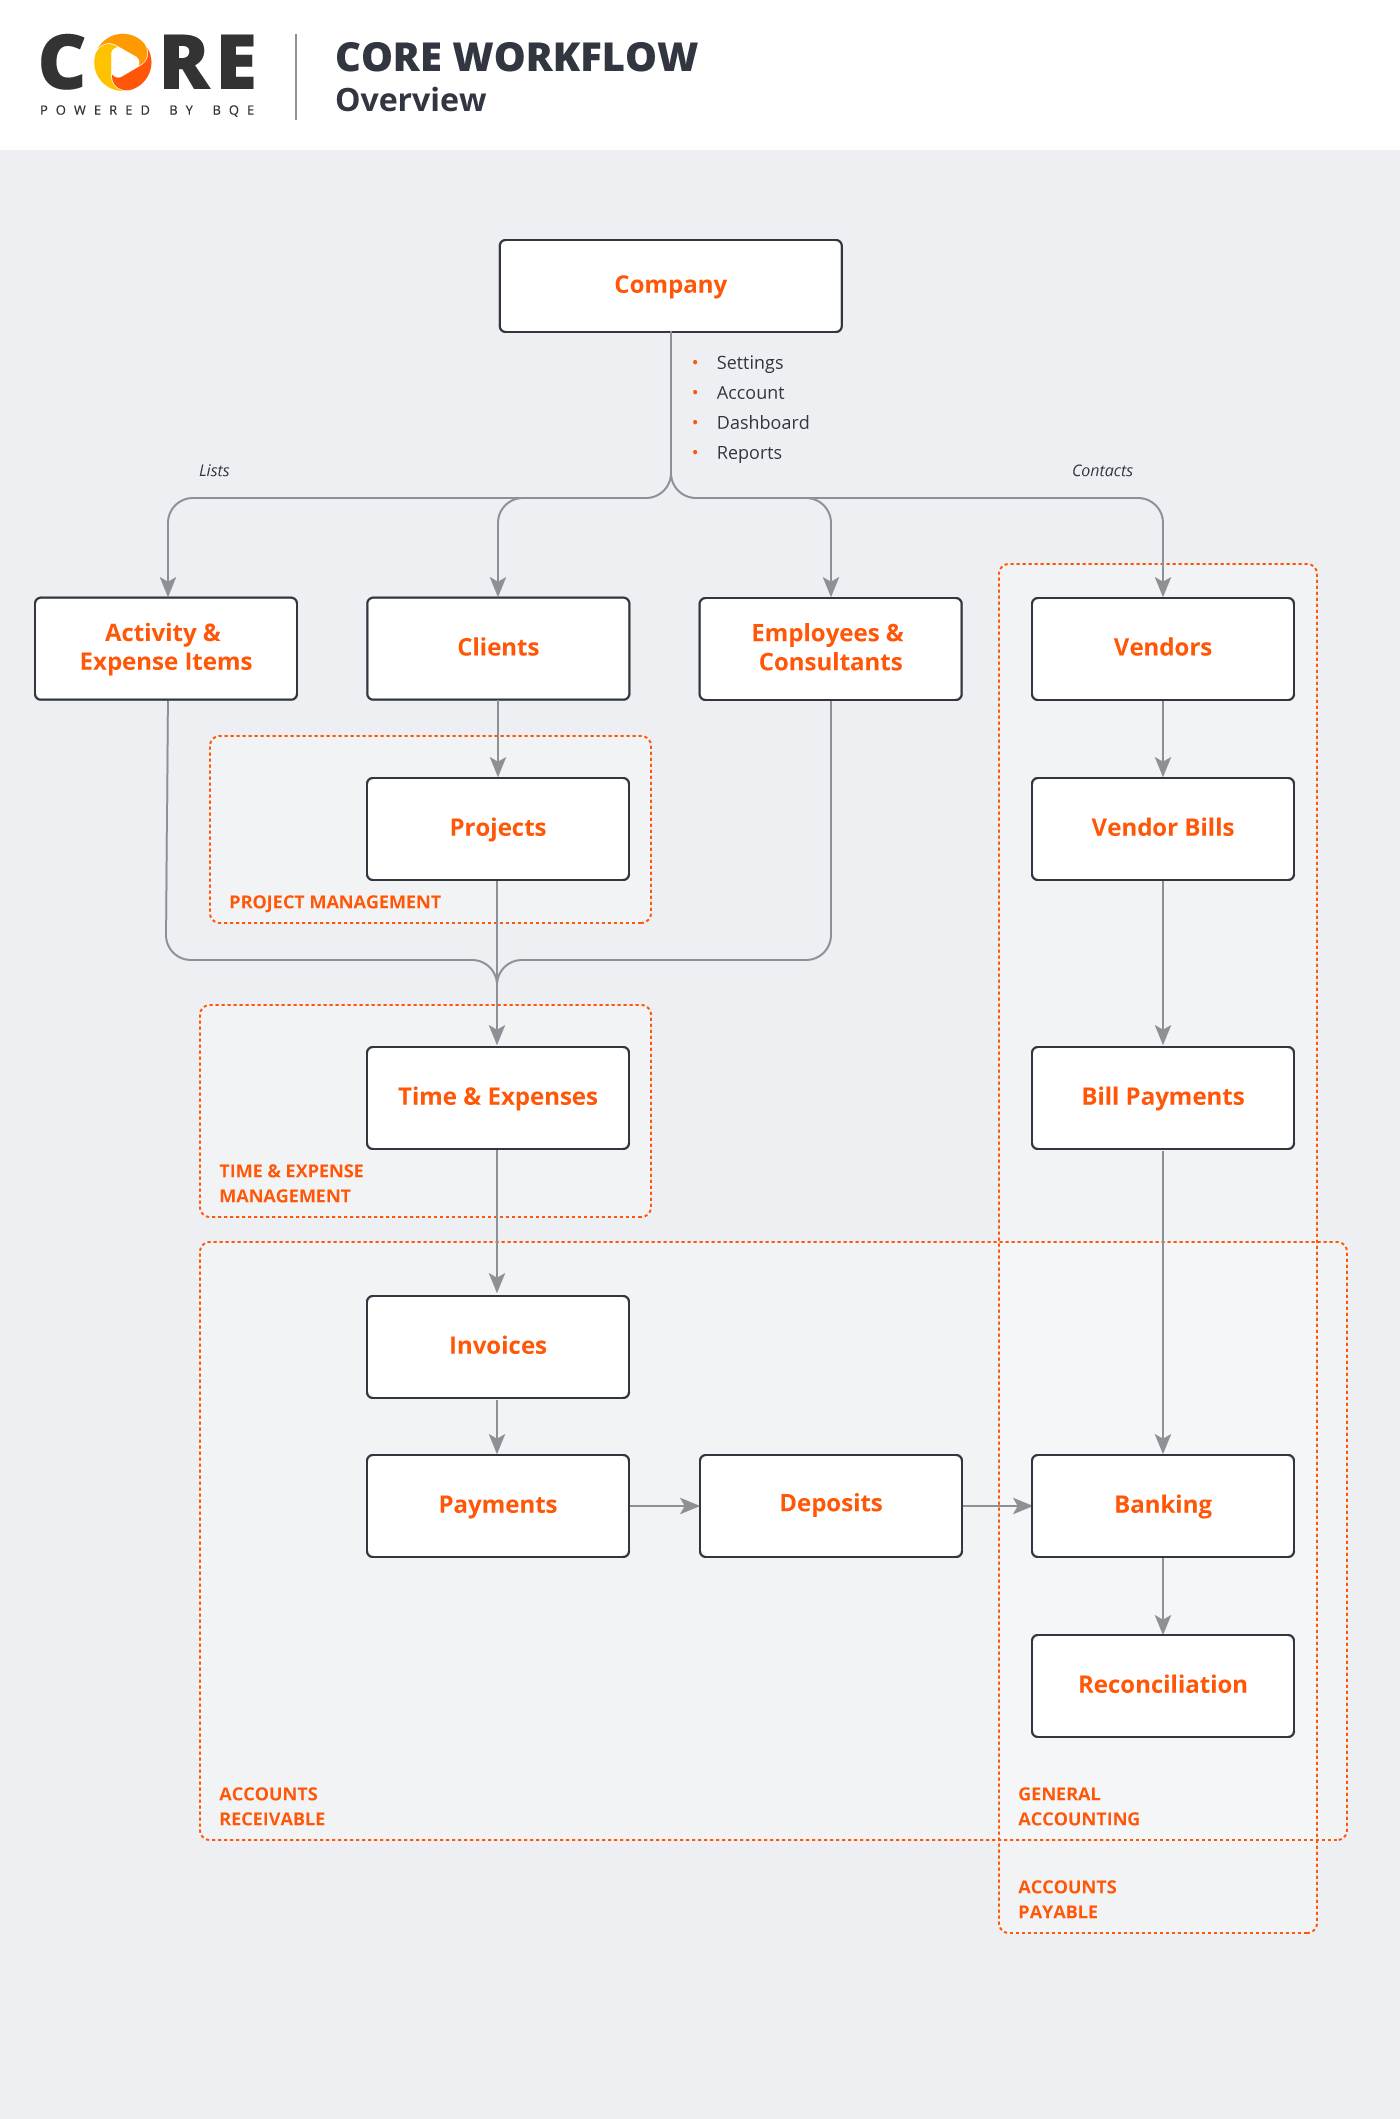 COREFlowDiagrams-Overview.png